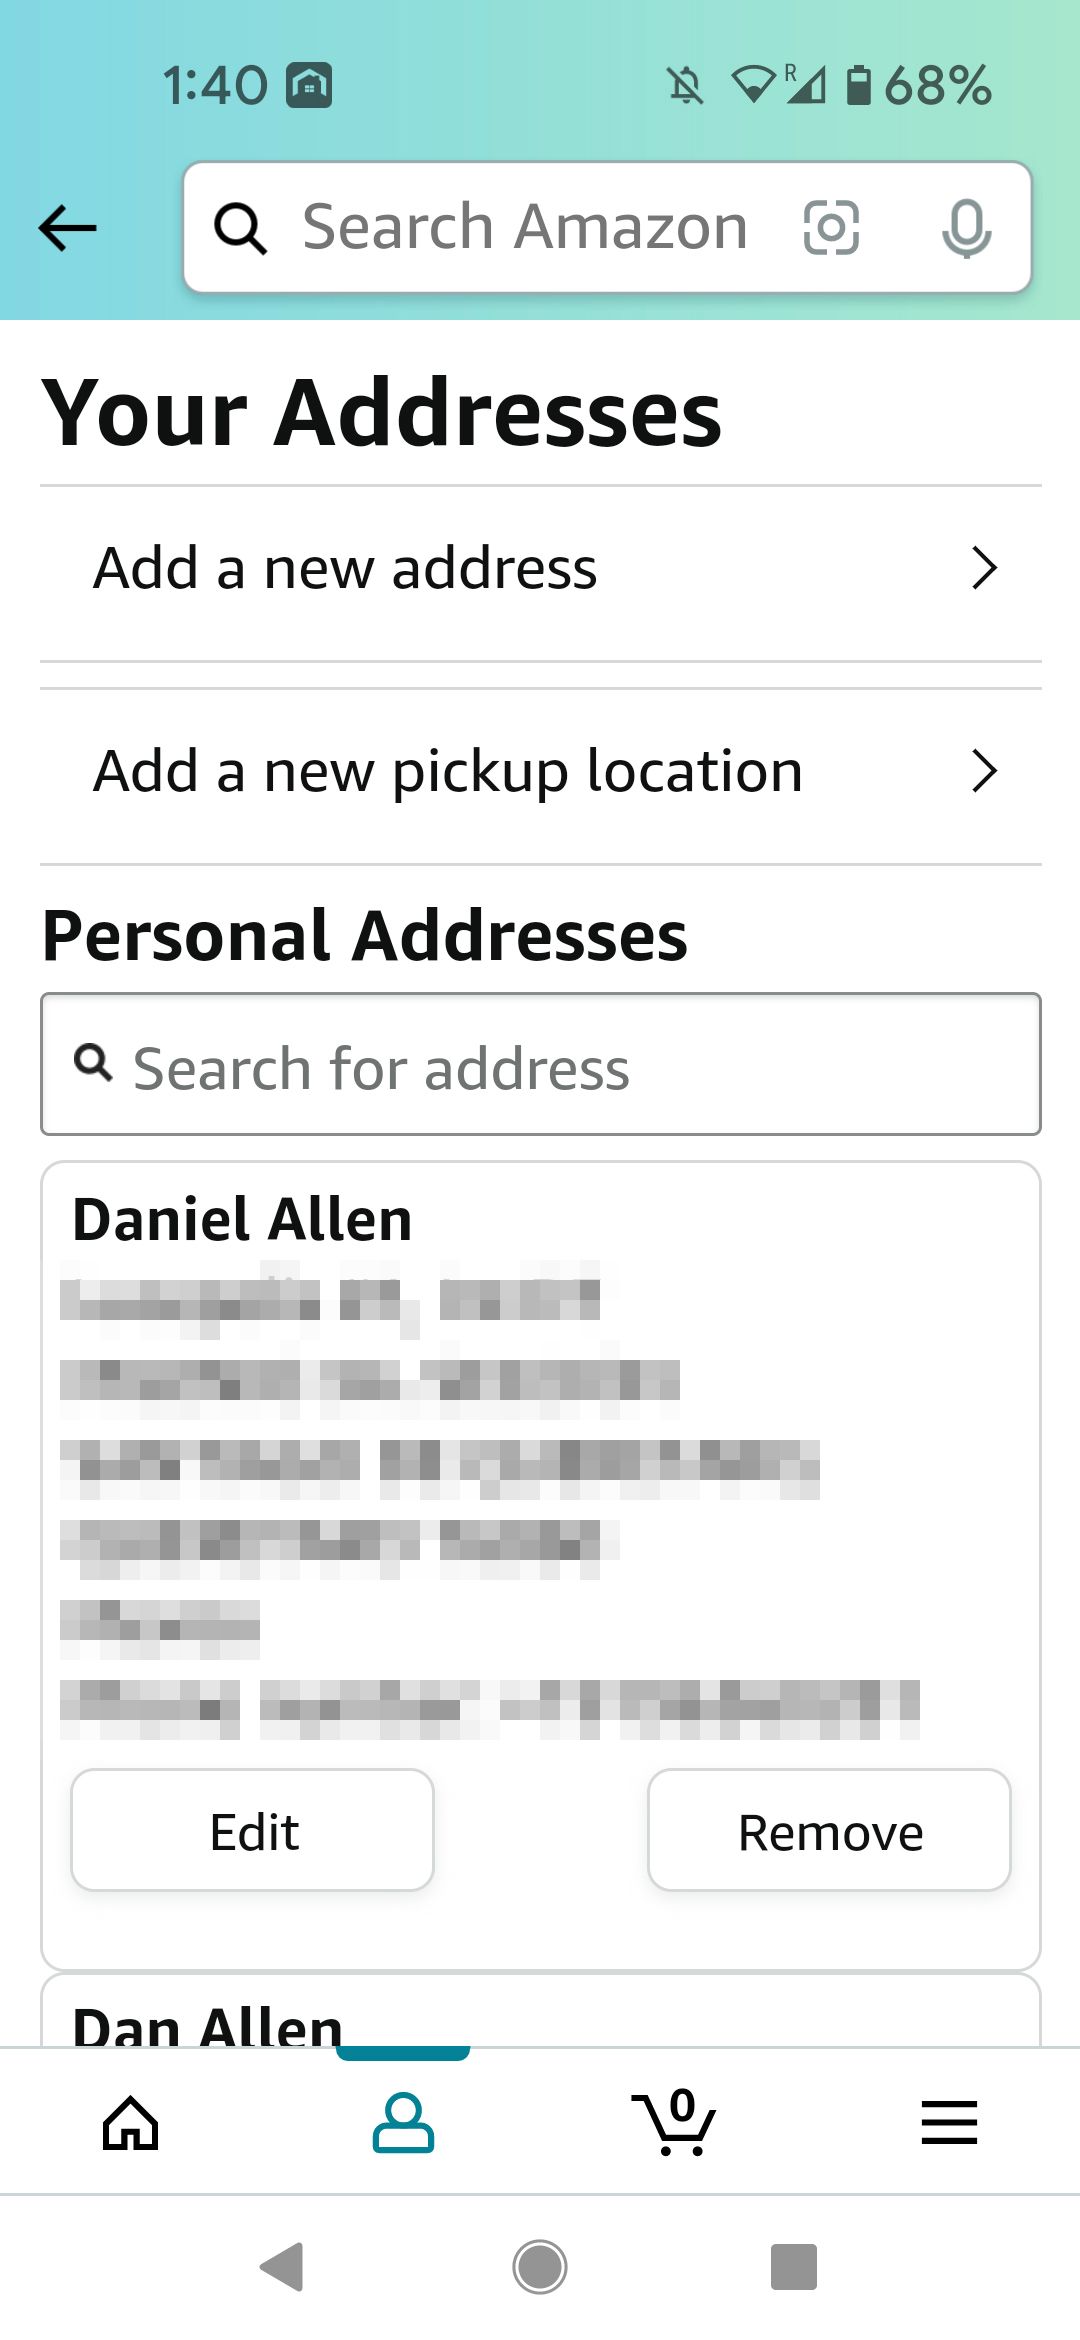 Add a new address in the Amazon mobile app